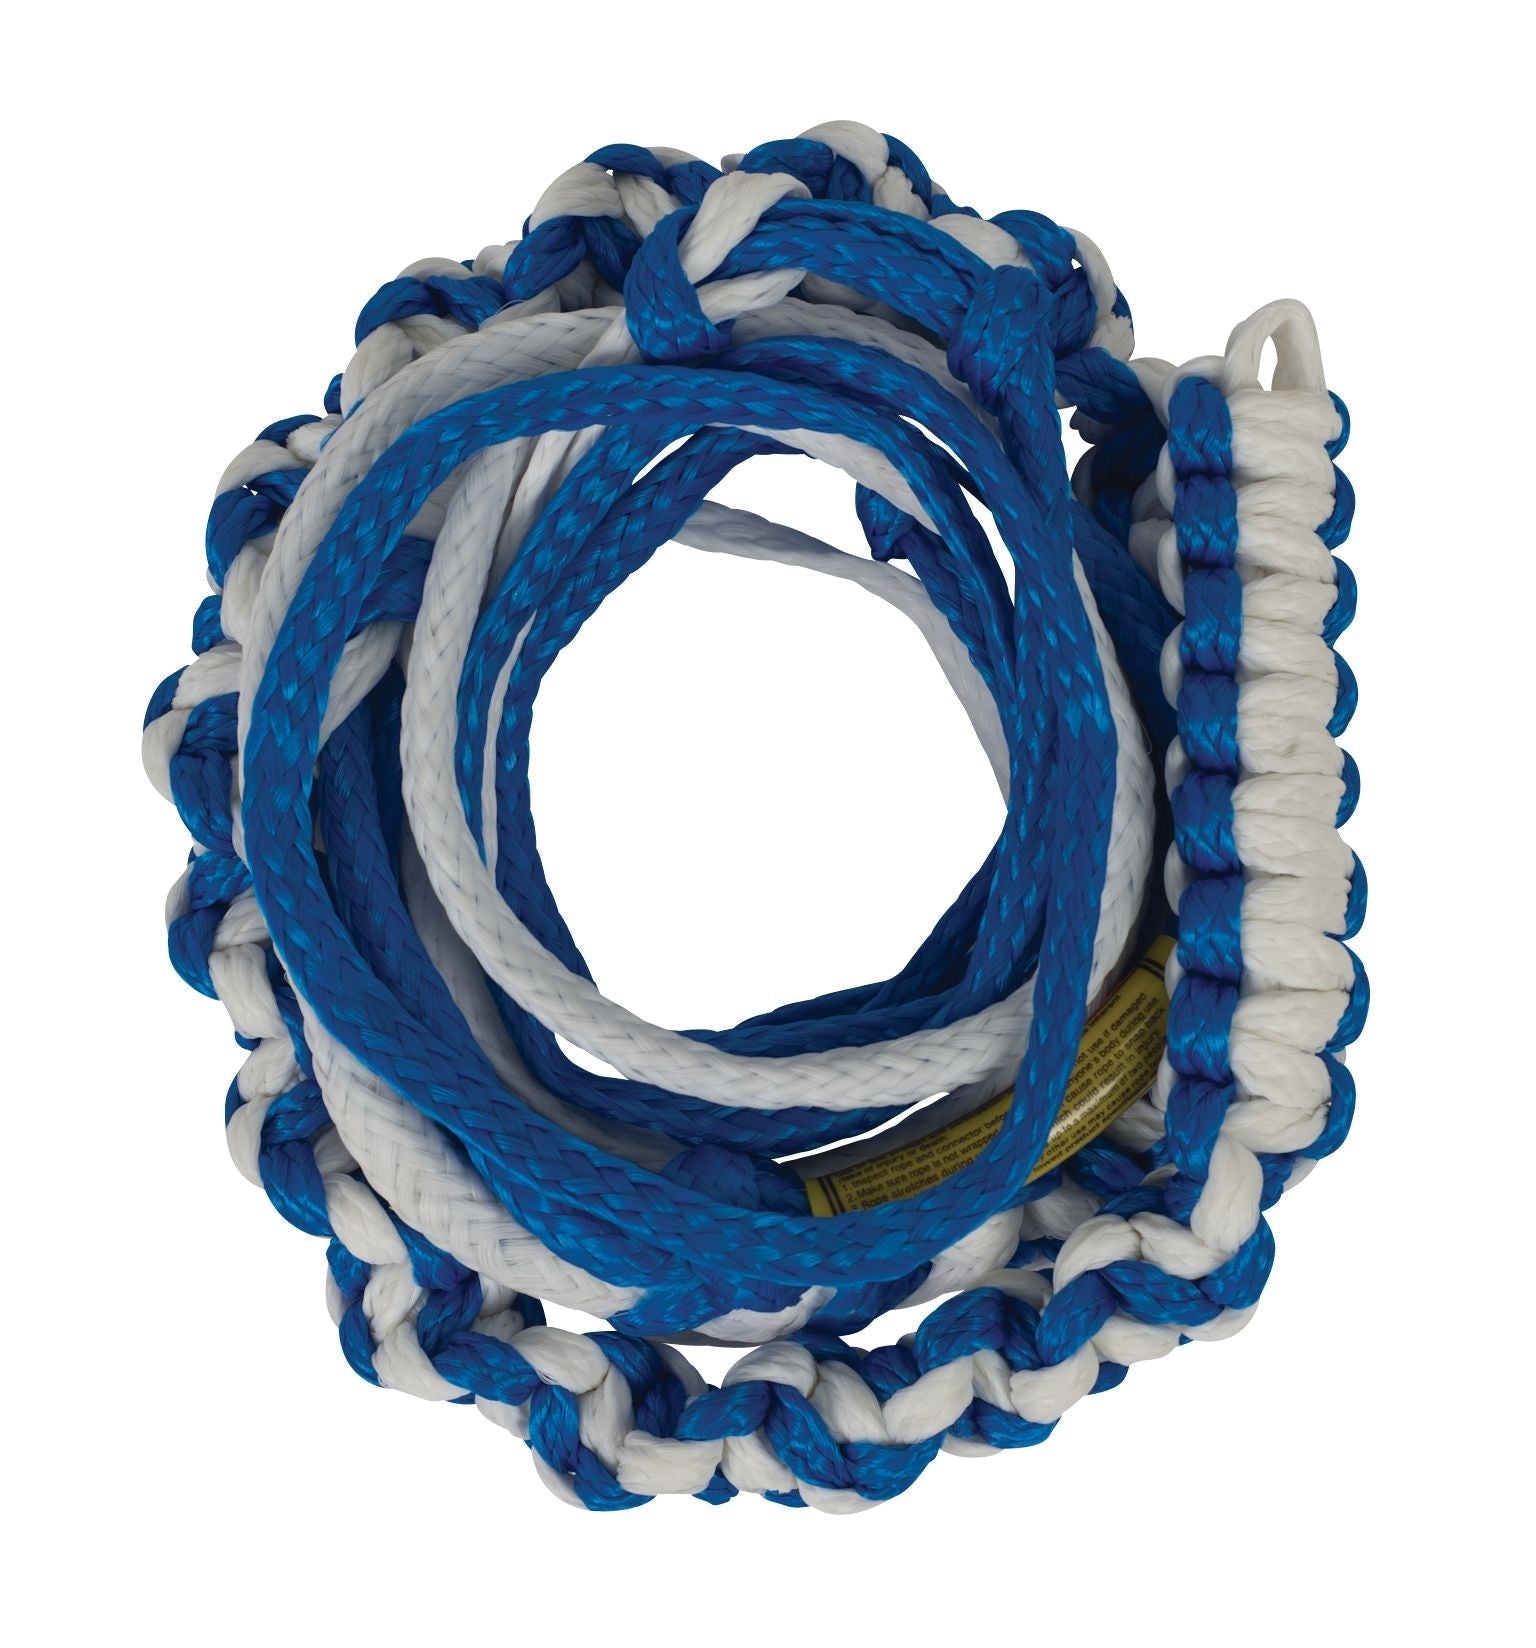 Hyperlite 20' Knotted Surf Rope